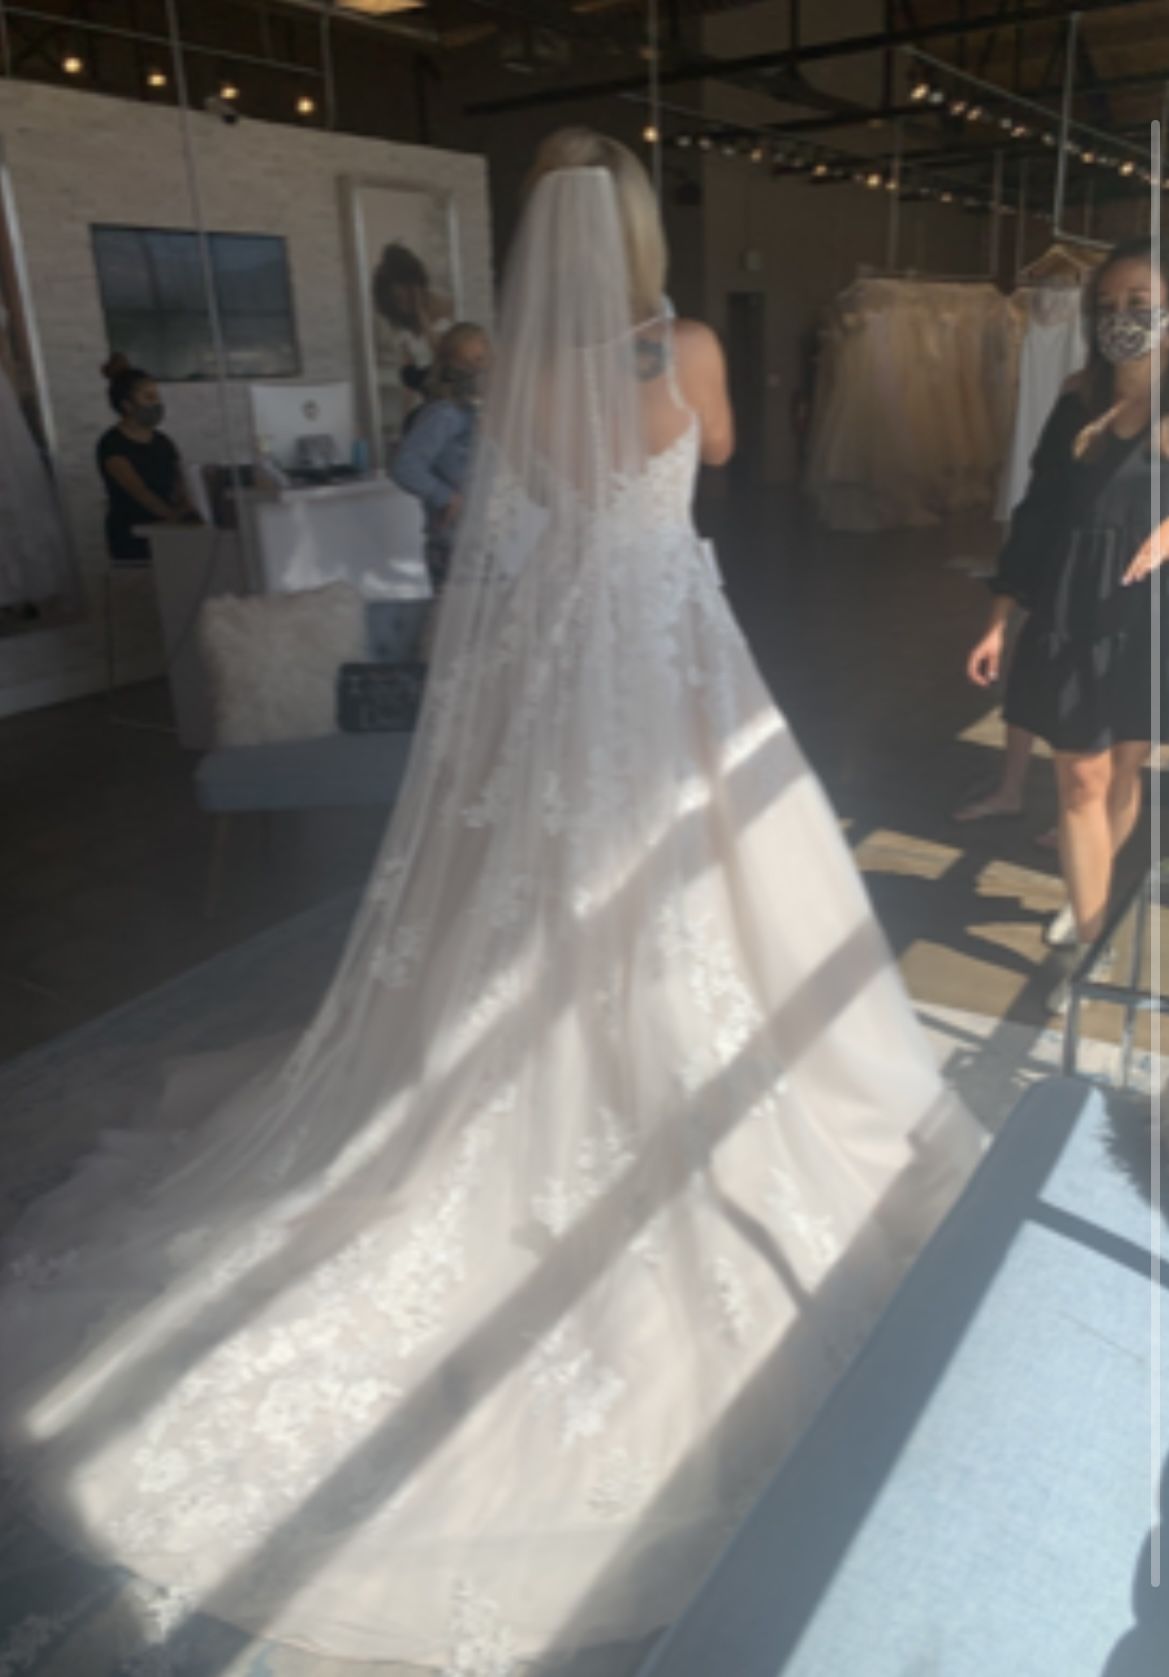 New, Out-of-package Cathedral Length Wedding Veil